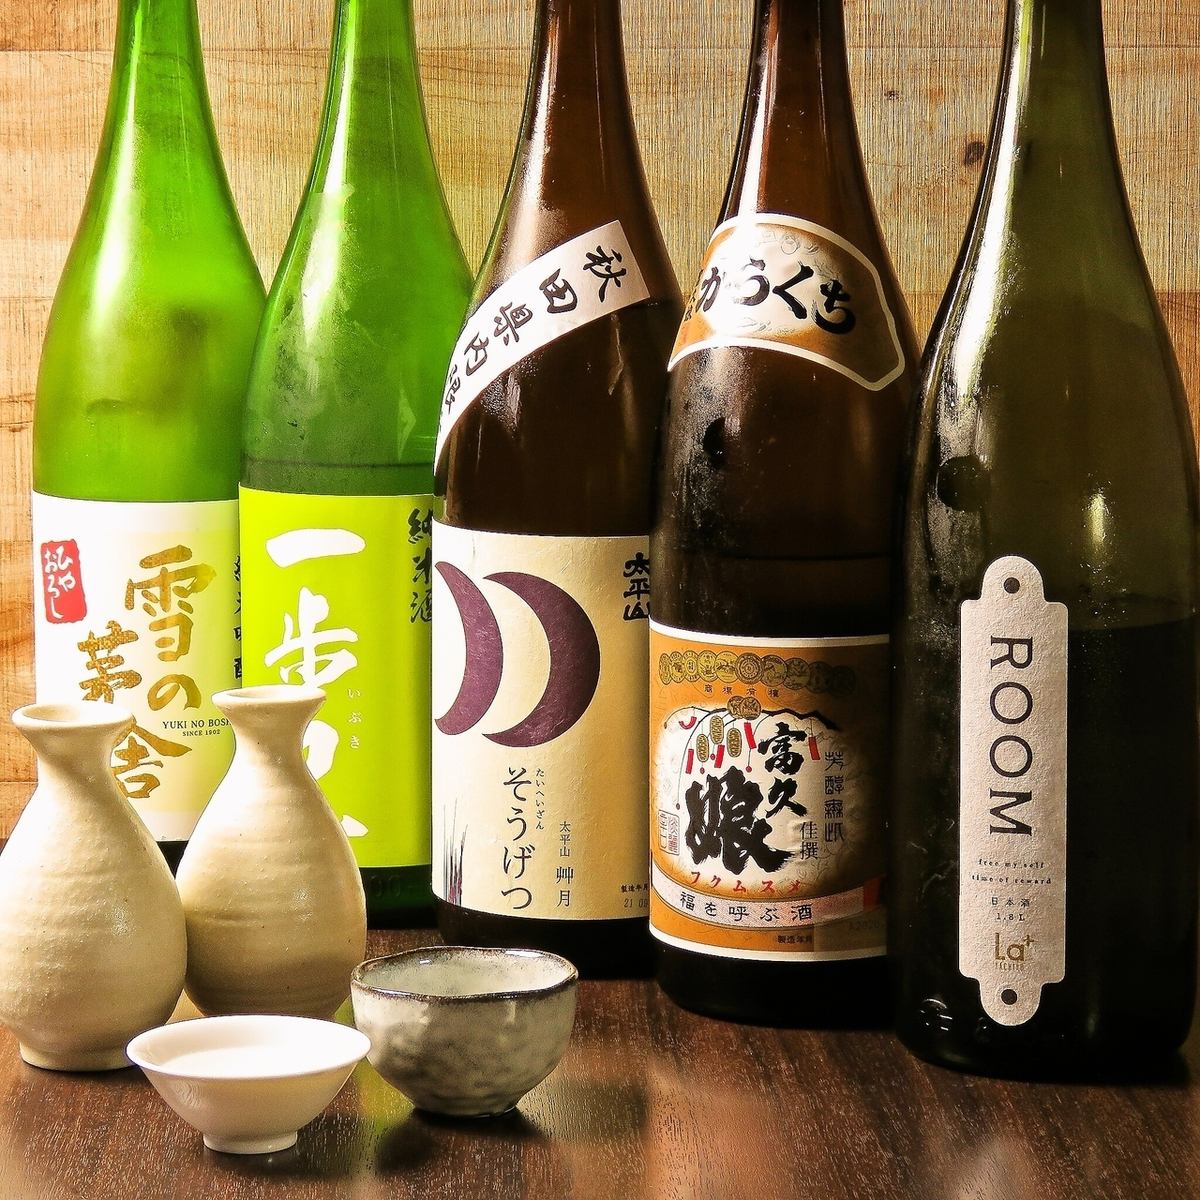 All-you-can-drink 1,980 yen for 2 hours via Hot Pepper Gourmet Reservation★